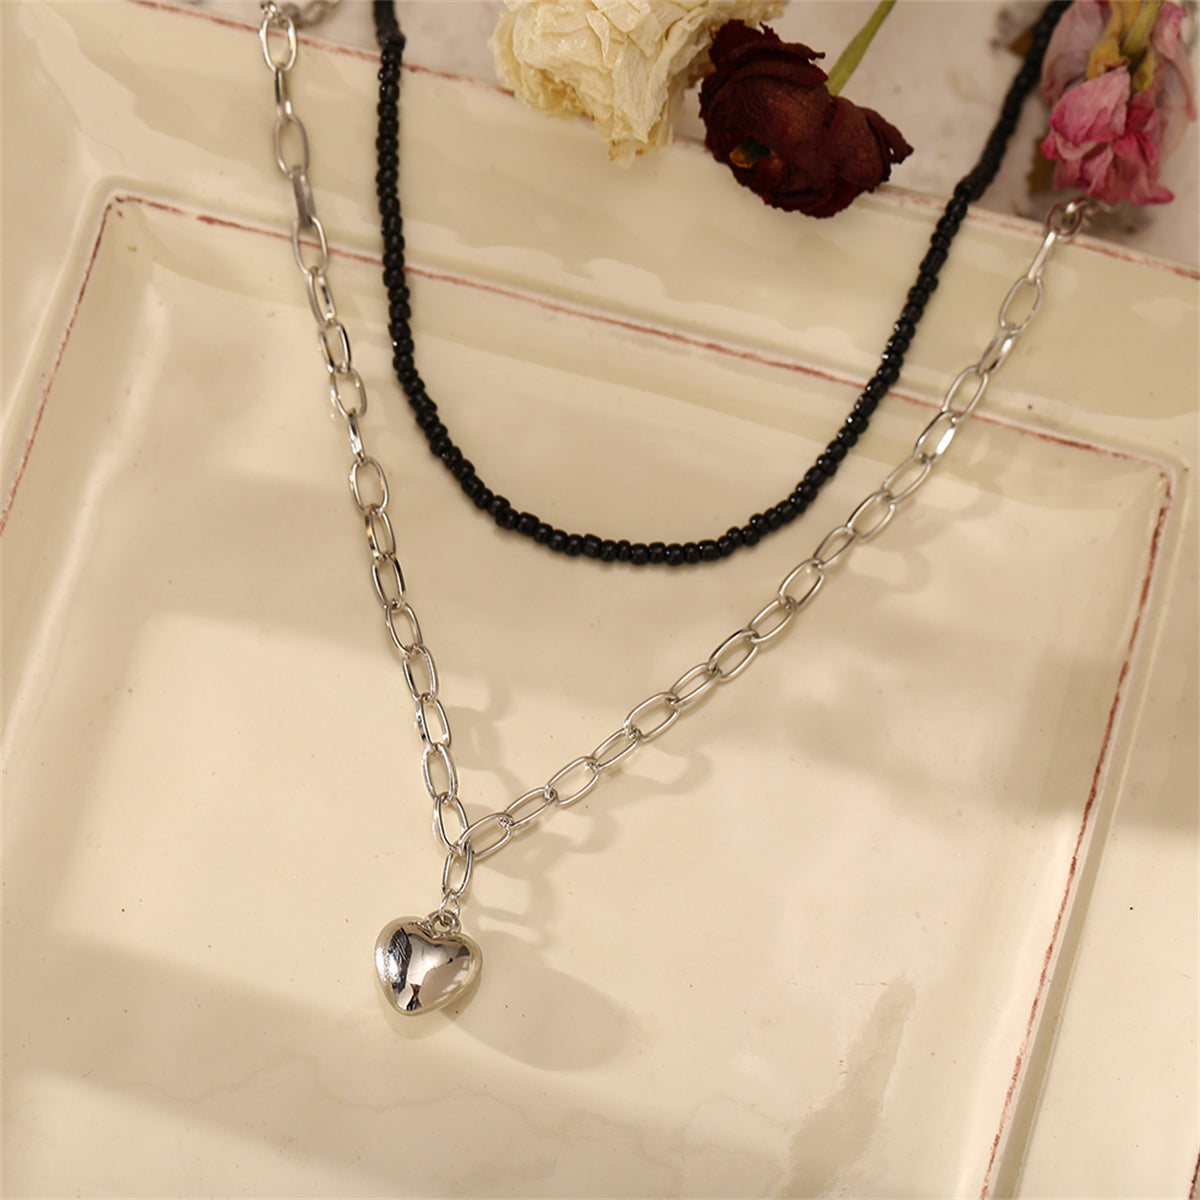 Black Howlite & Silver-Plated Heart Pendant Necklace Set